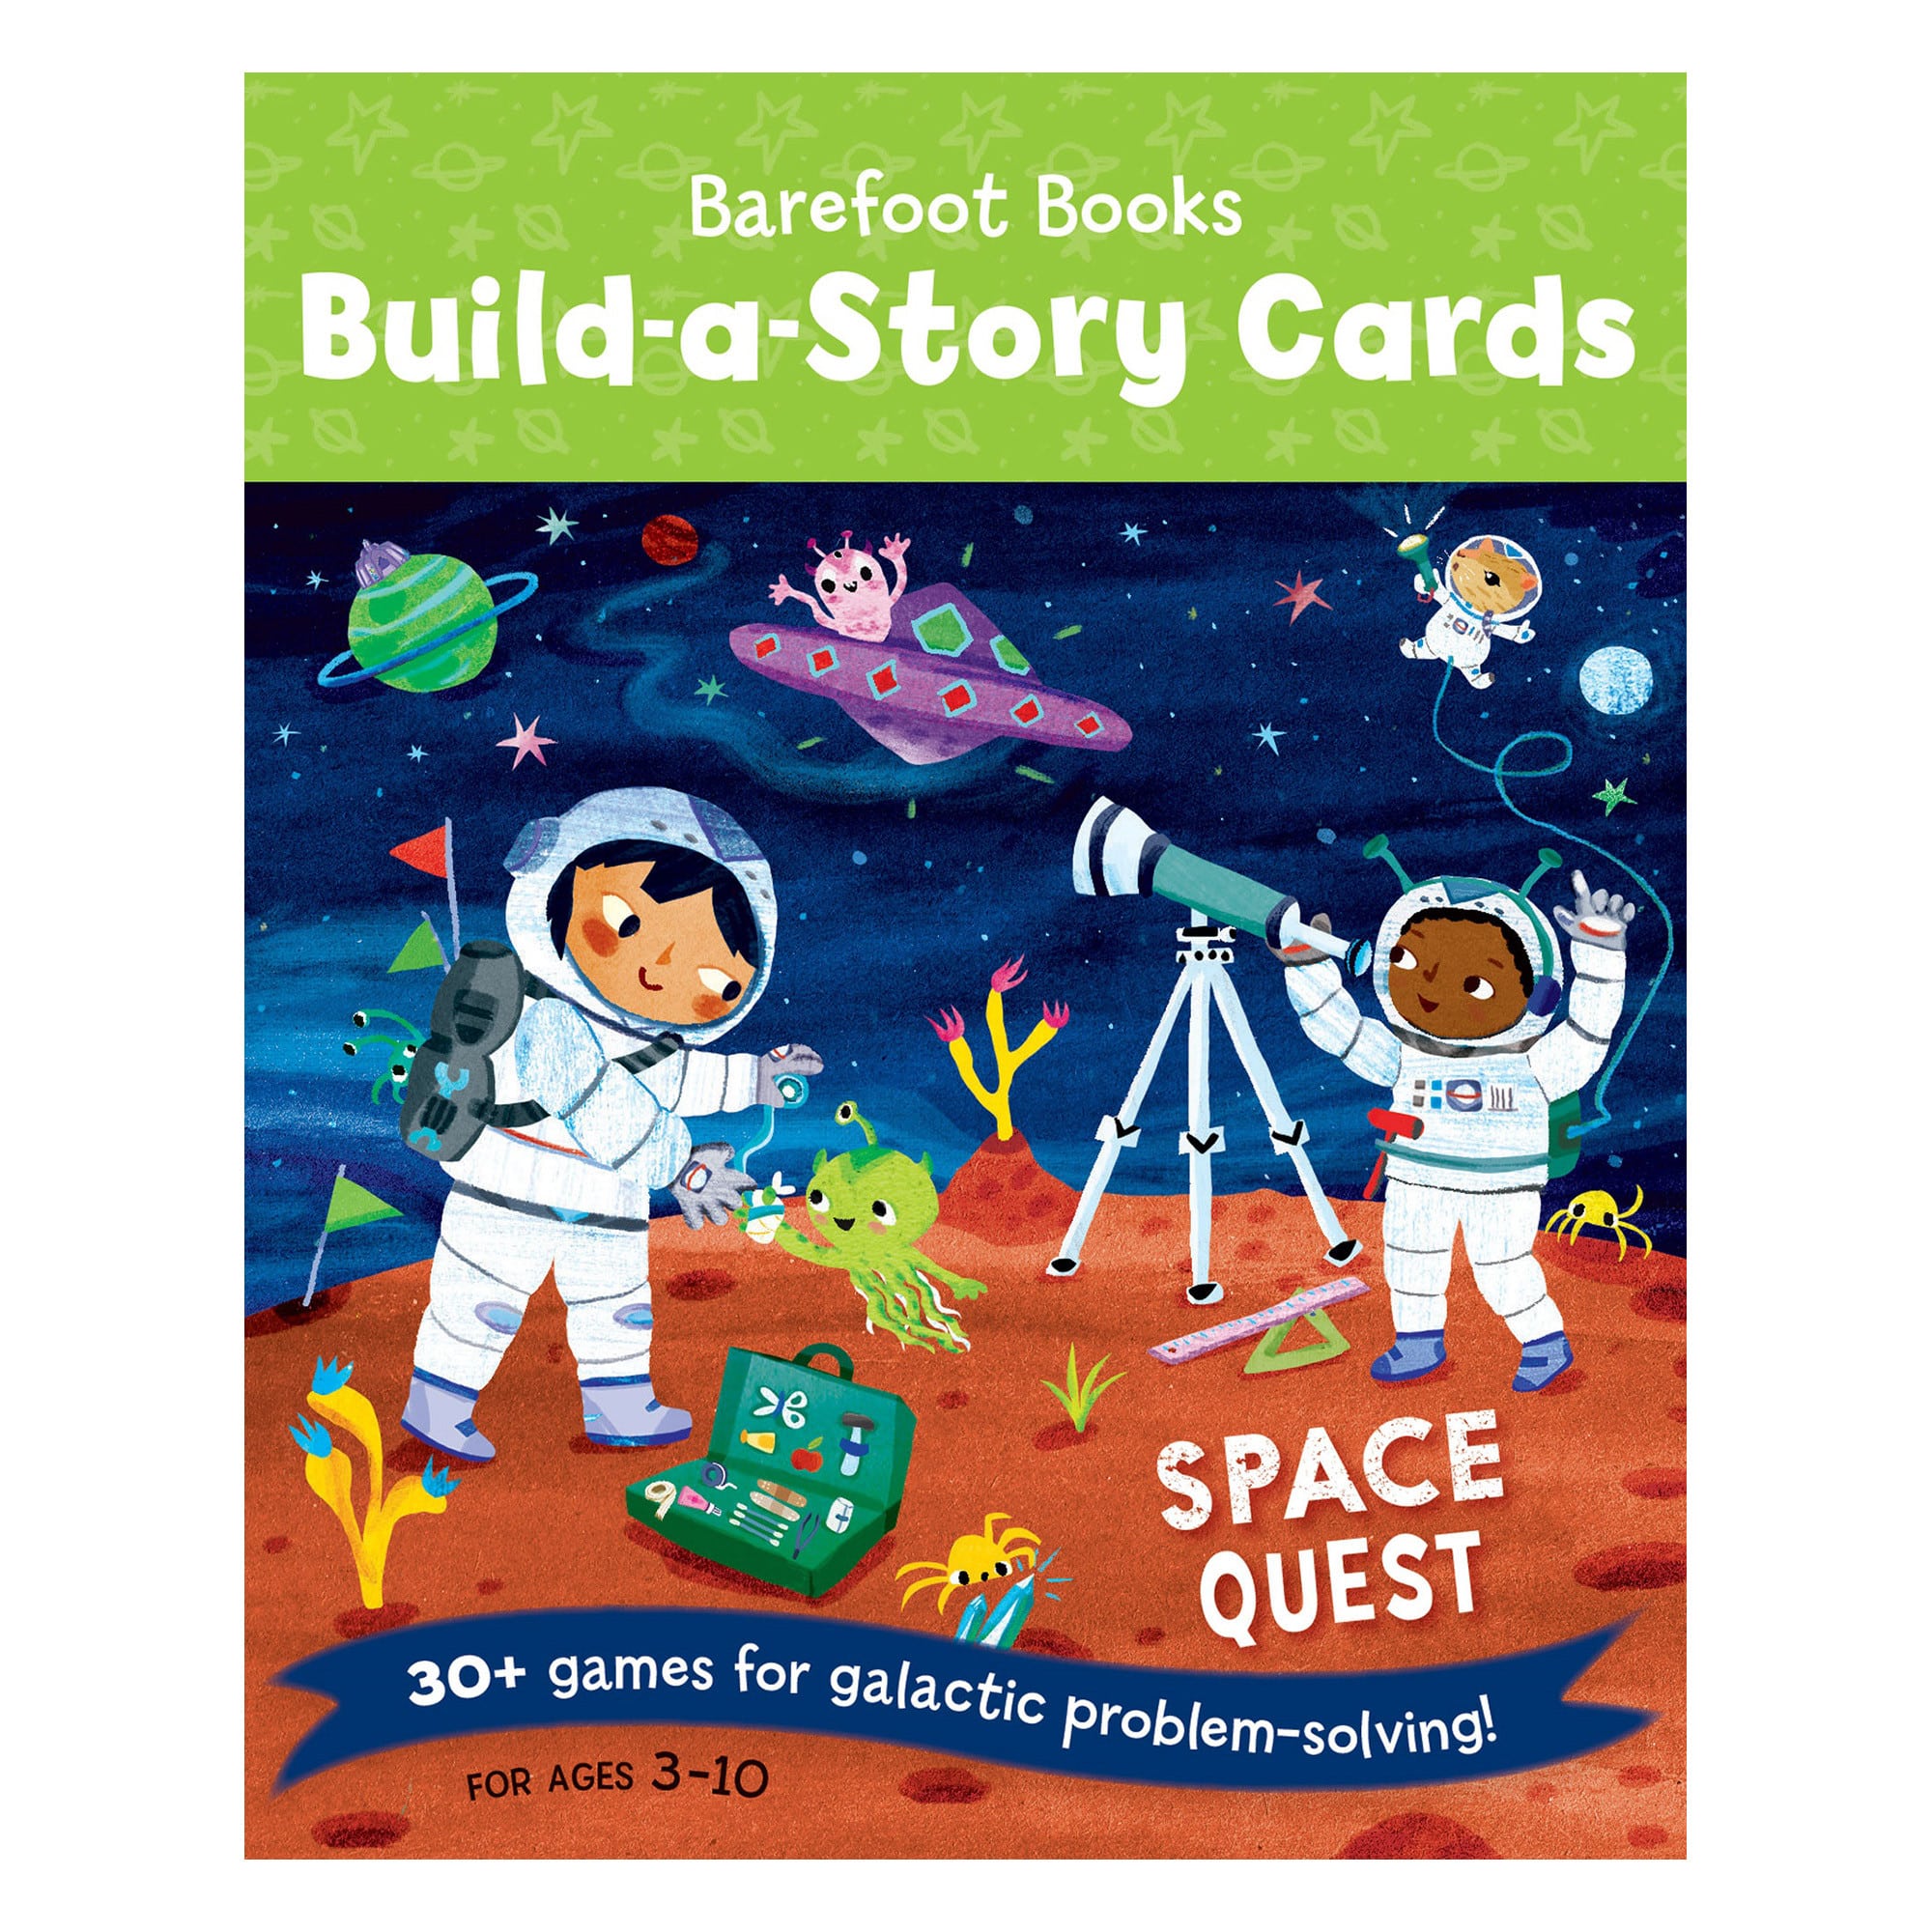 Build-a-Story Cards - Space Quest - by Barefoot Books